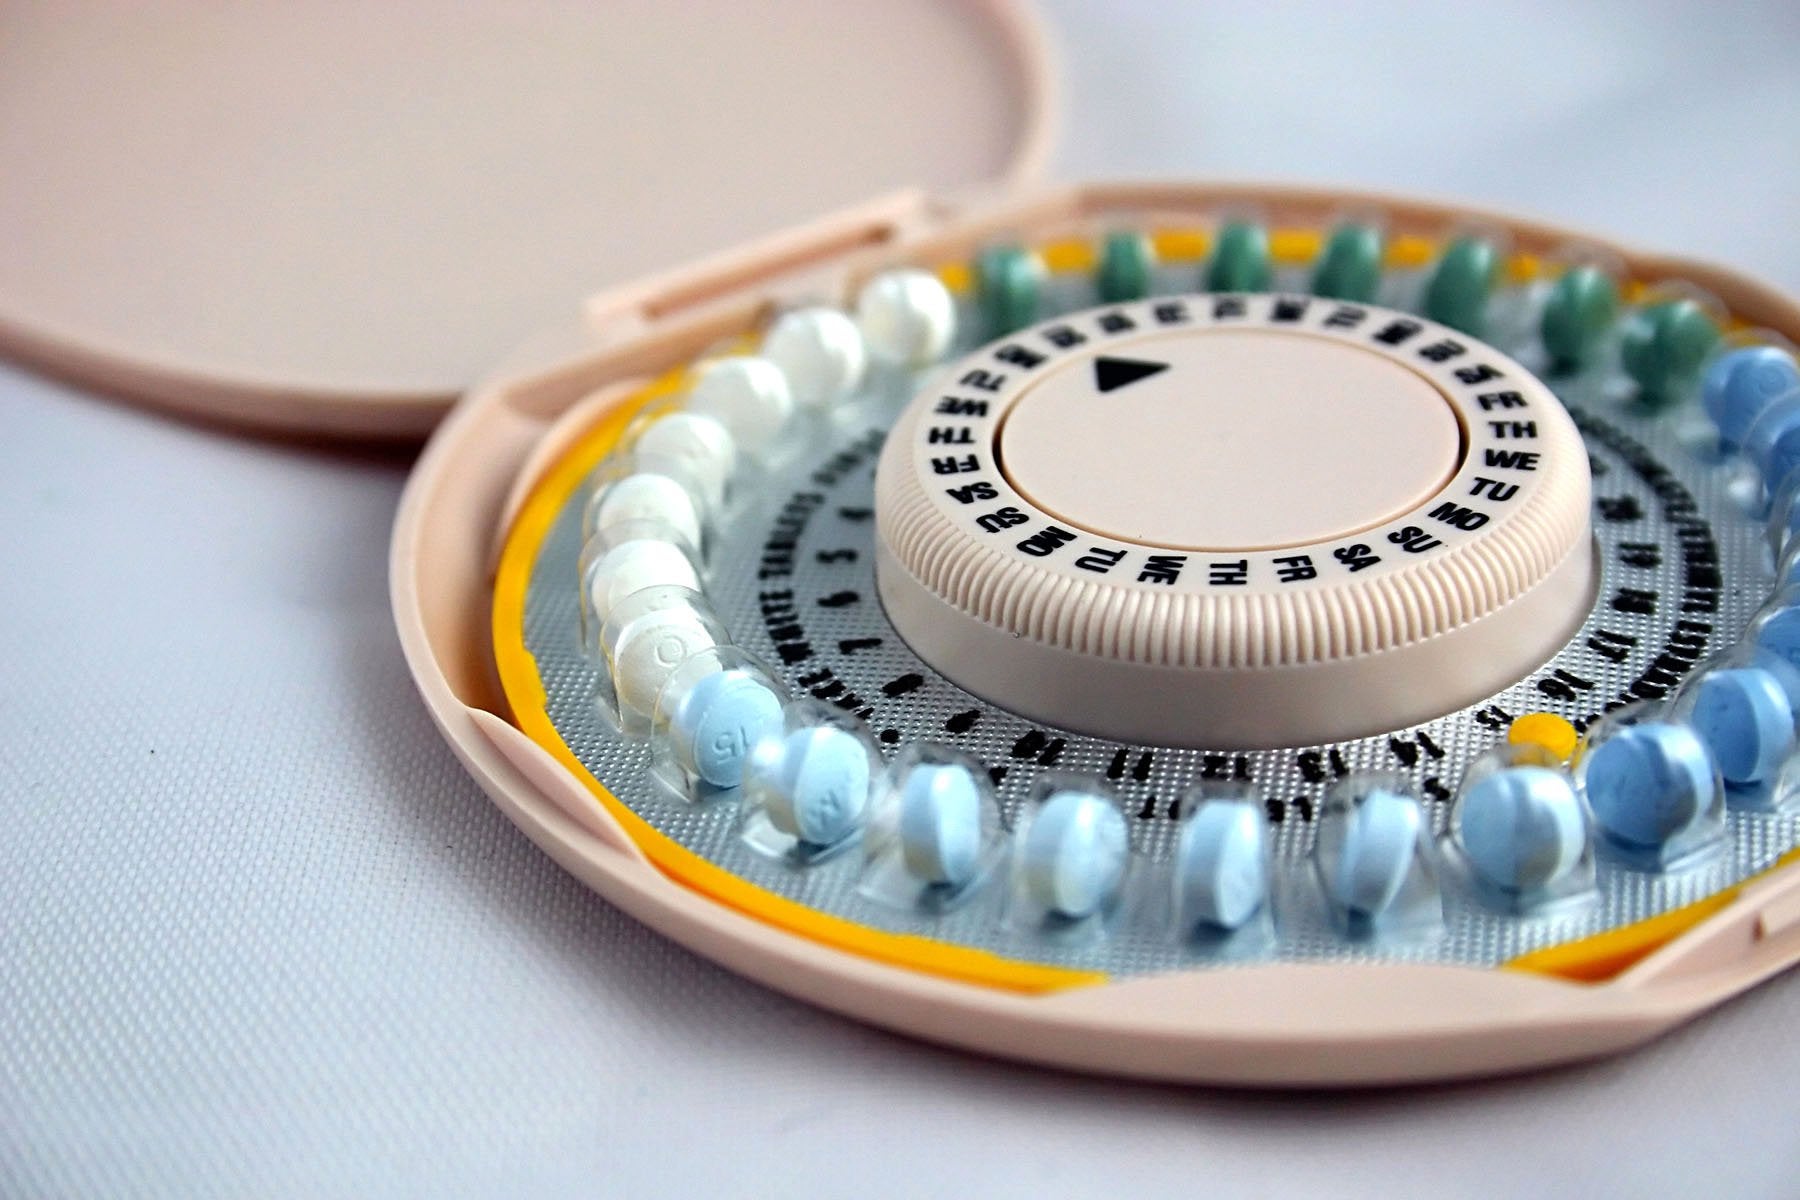 Access To Most Effective Birth Control Could Save $12 Billion A Year: Study